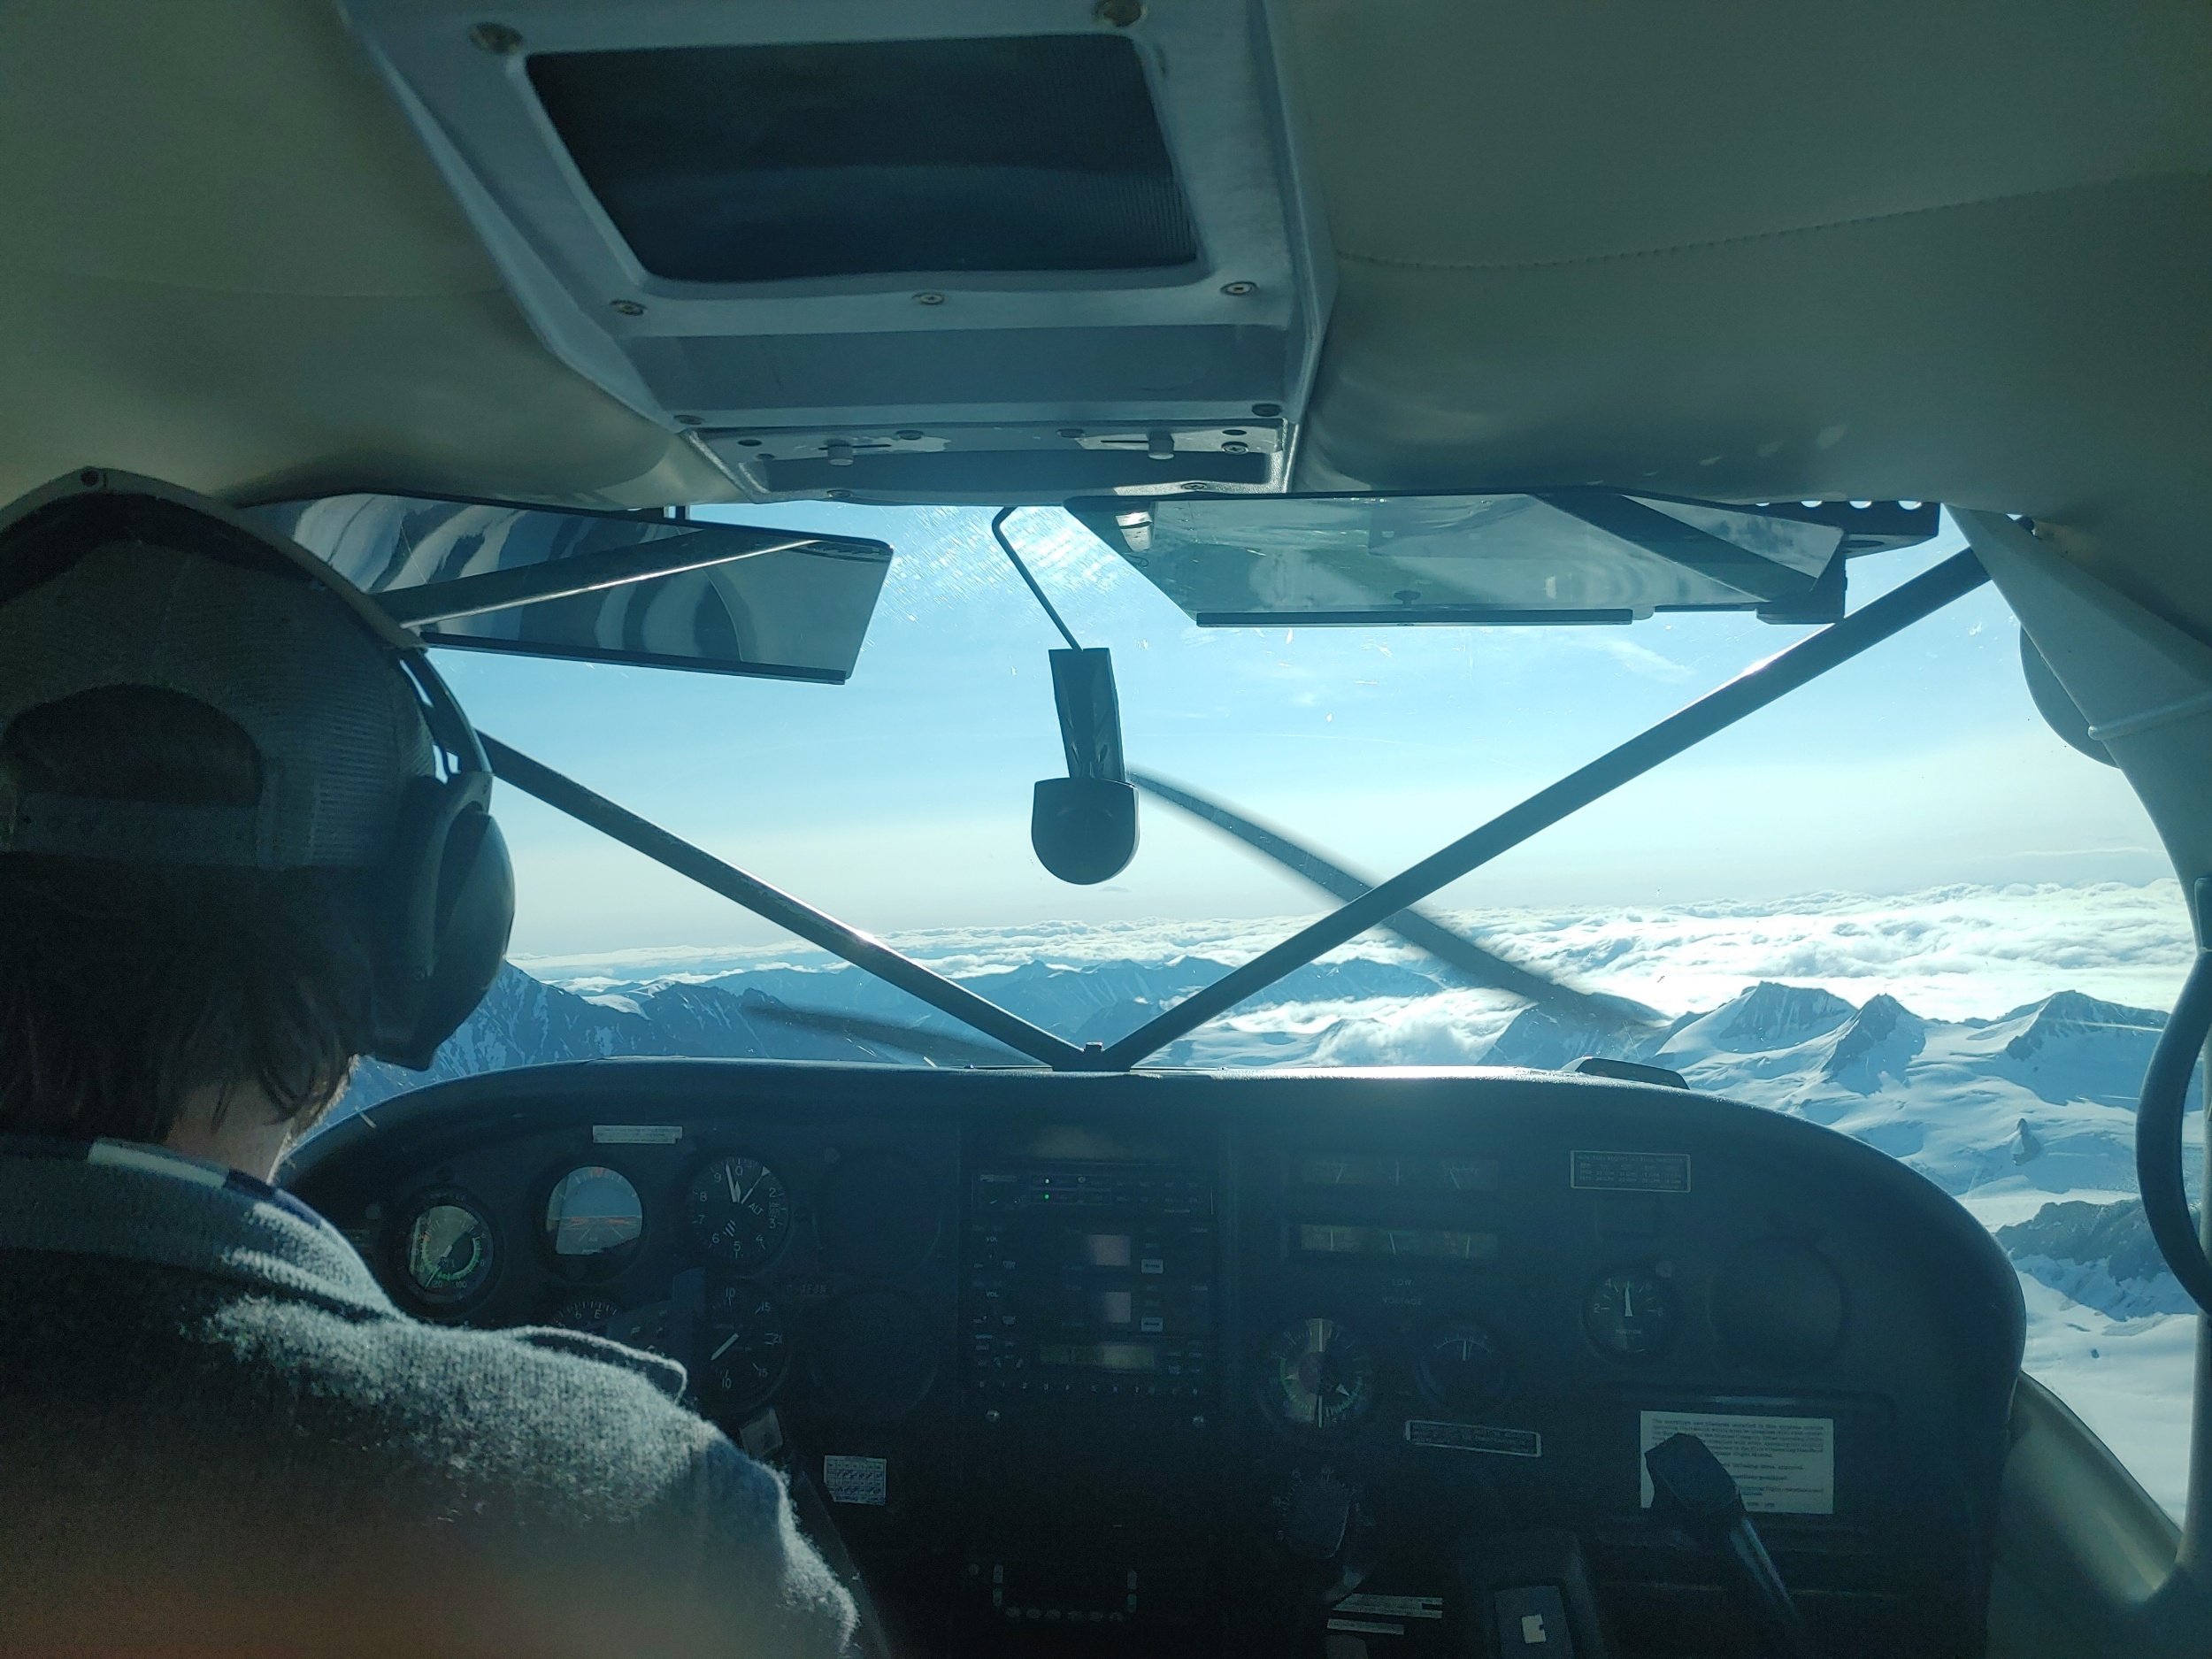  I used to think I wanted my pilot’s license. This flight made me not want my pilot’s license!   Fortunately Stuart is an excellent pilot. When he started to announce the wind changes ahead of time, it made me feel a little better. It’s incredible ho